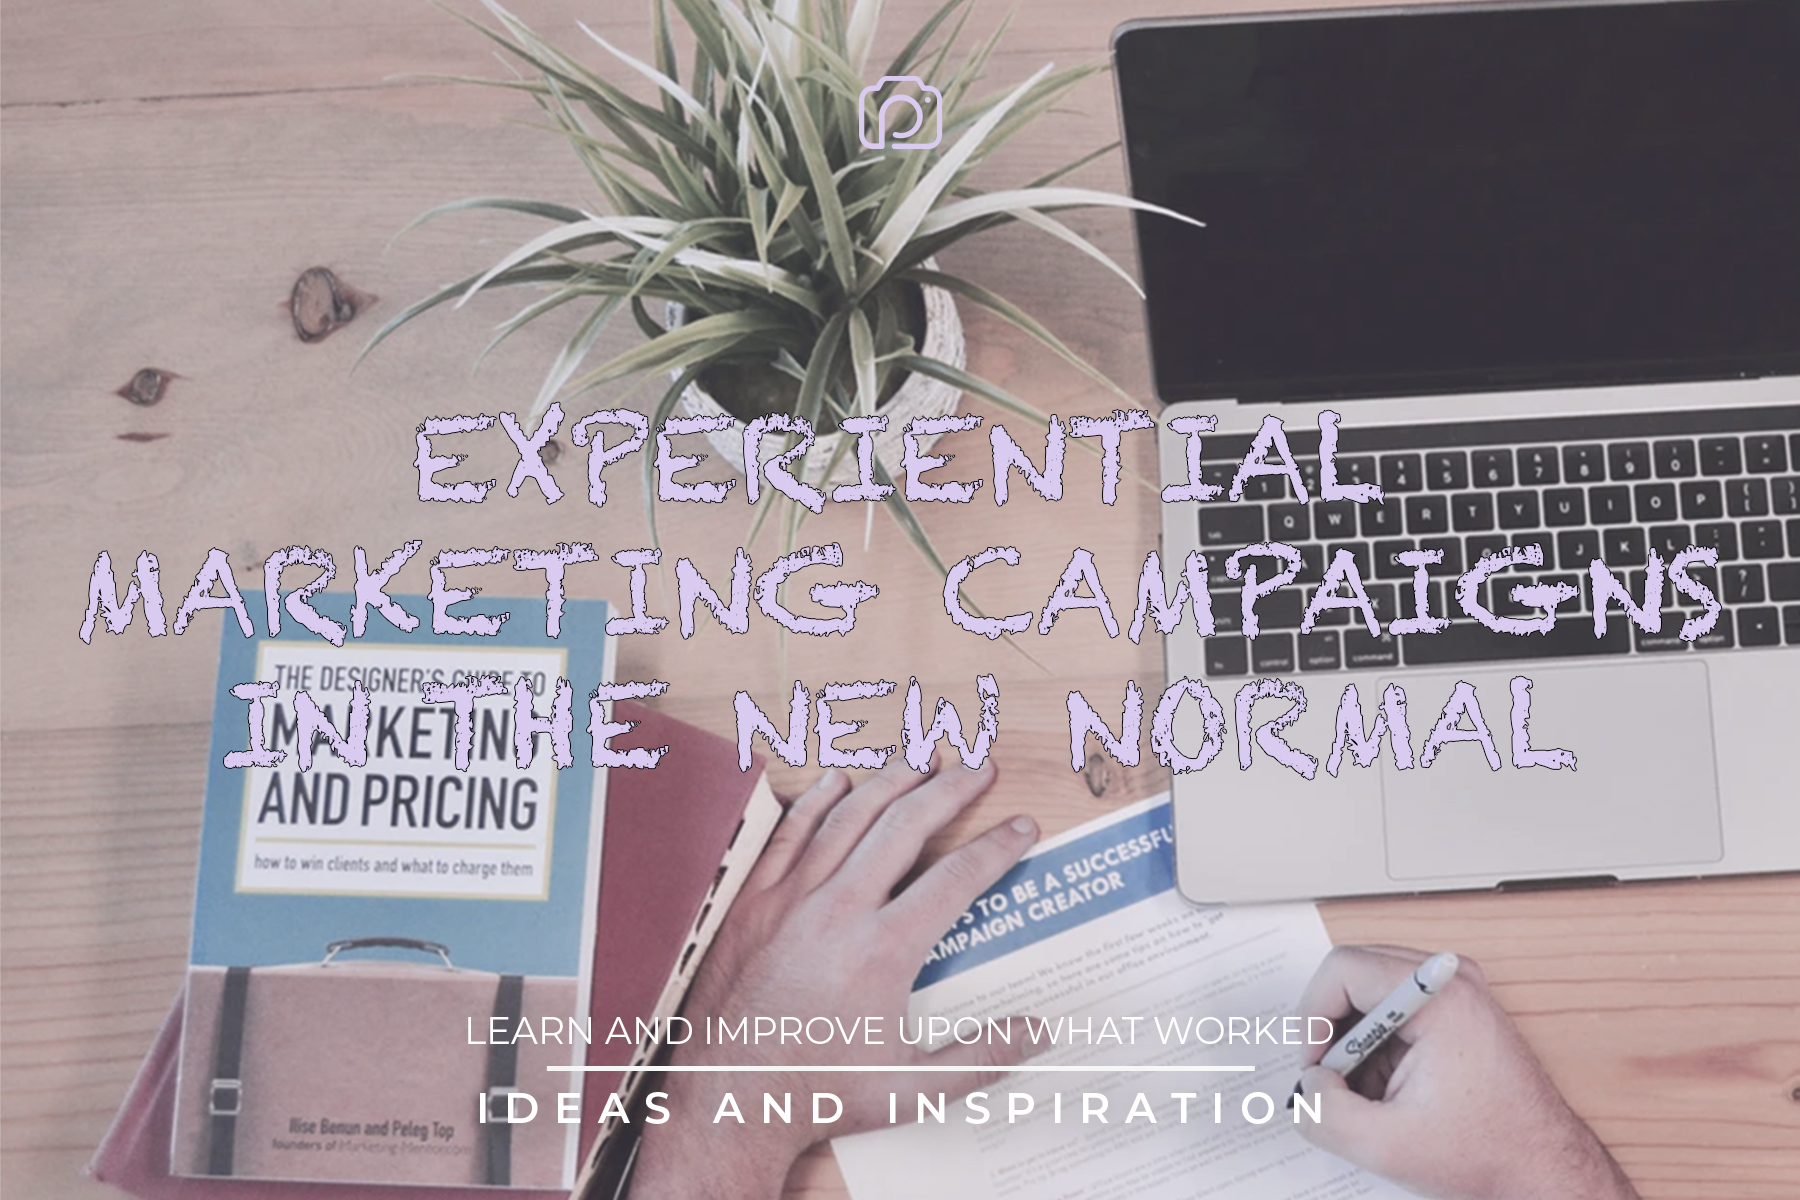 Experiential marketing campaigns in the new normal